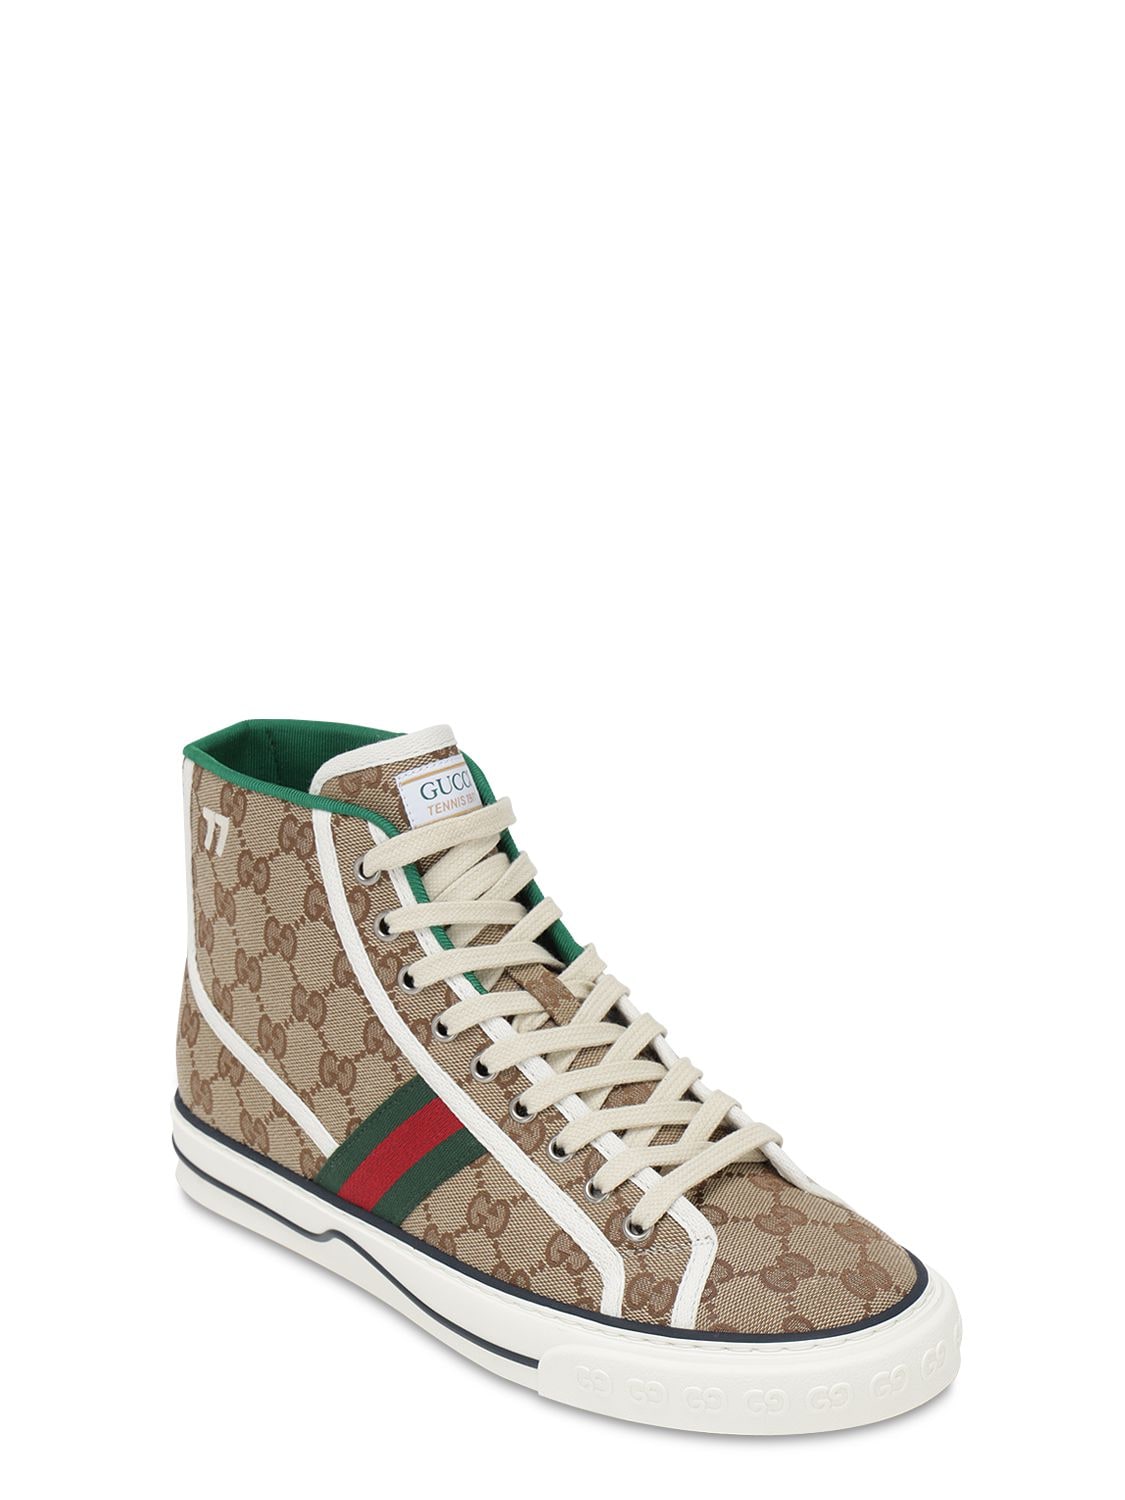 Shop Gucci Tennis 1977 Gg Canvas Sneakers In Beige